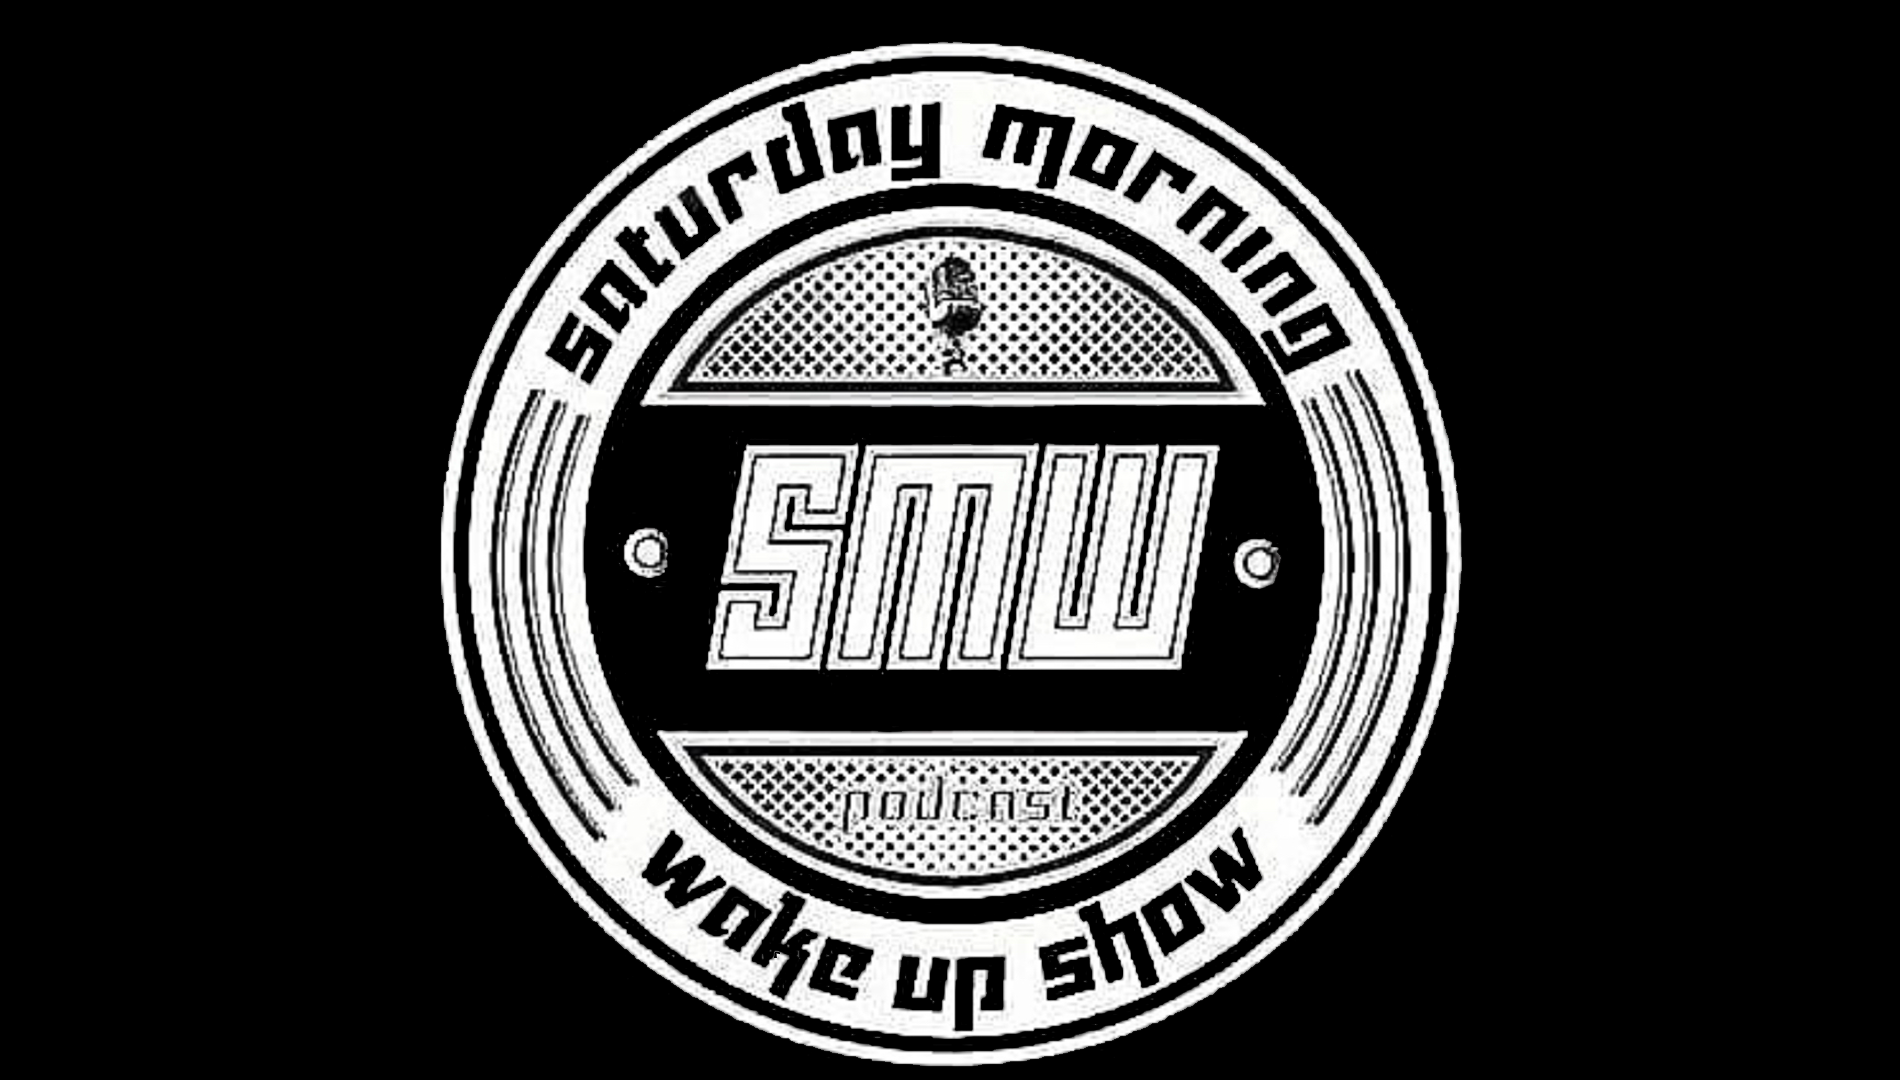 the saturday morning wake up show